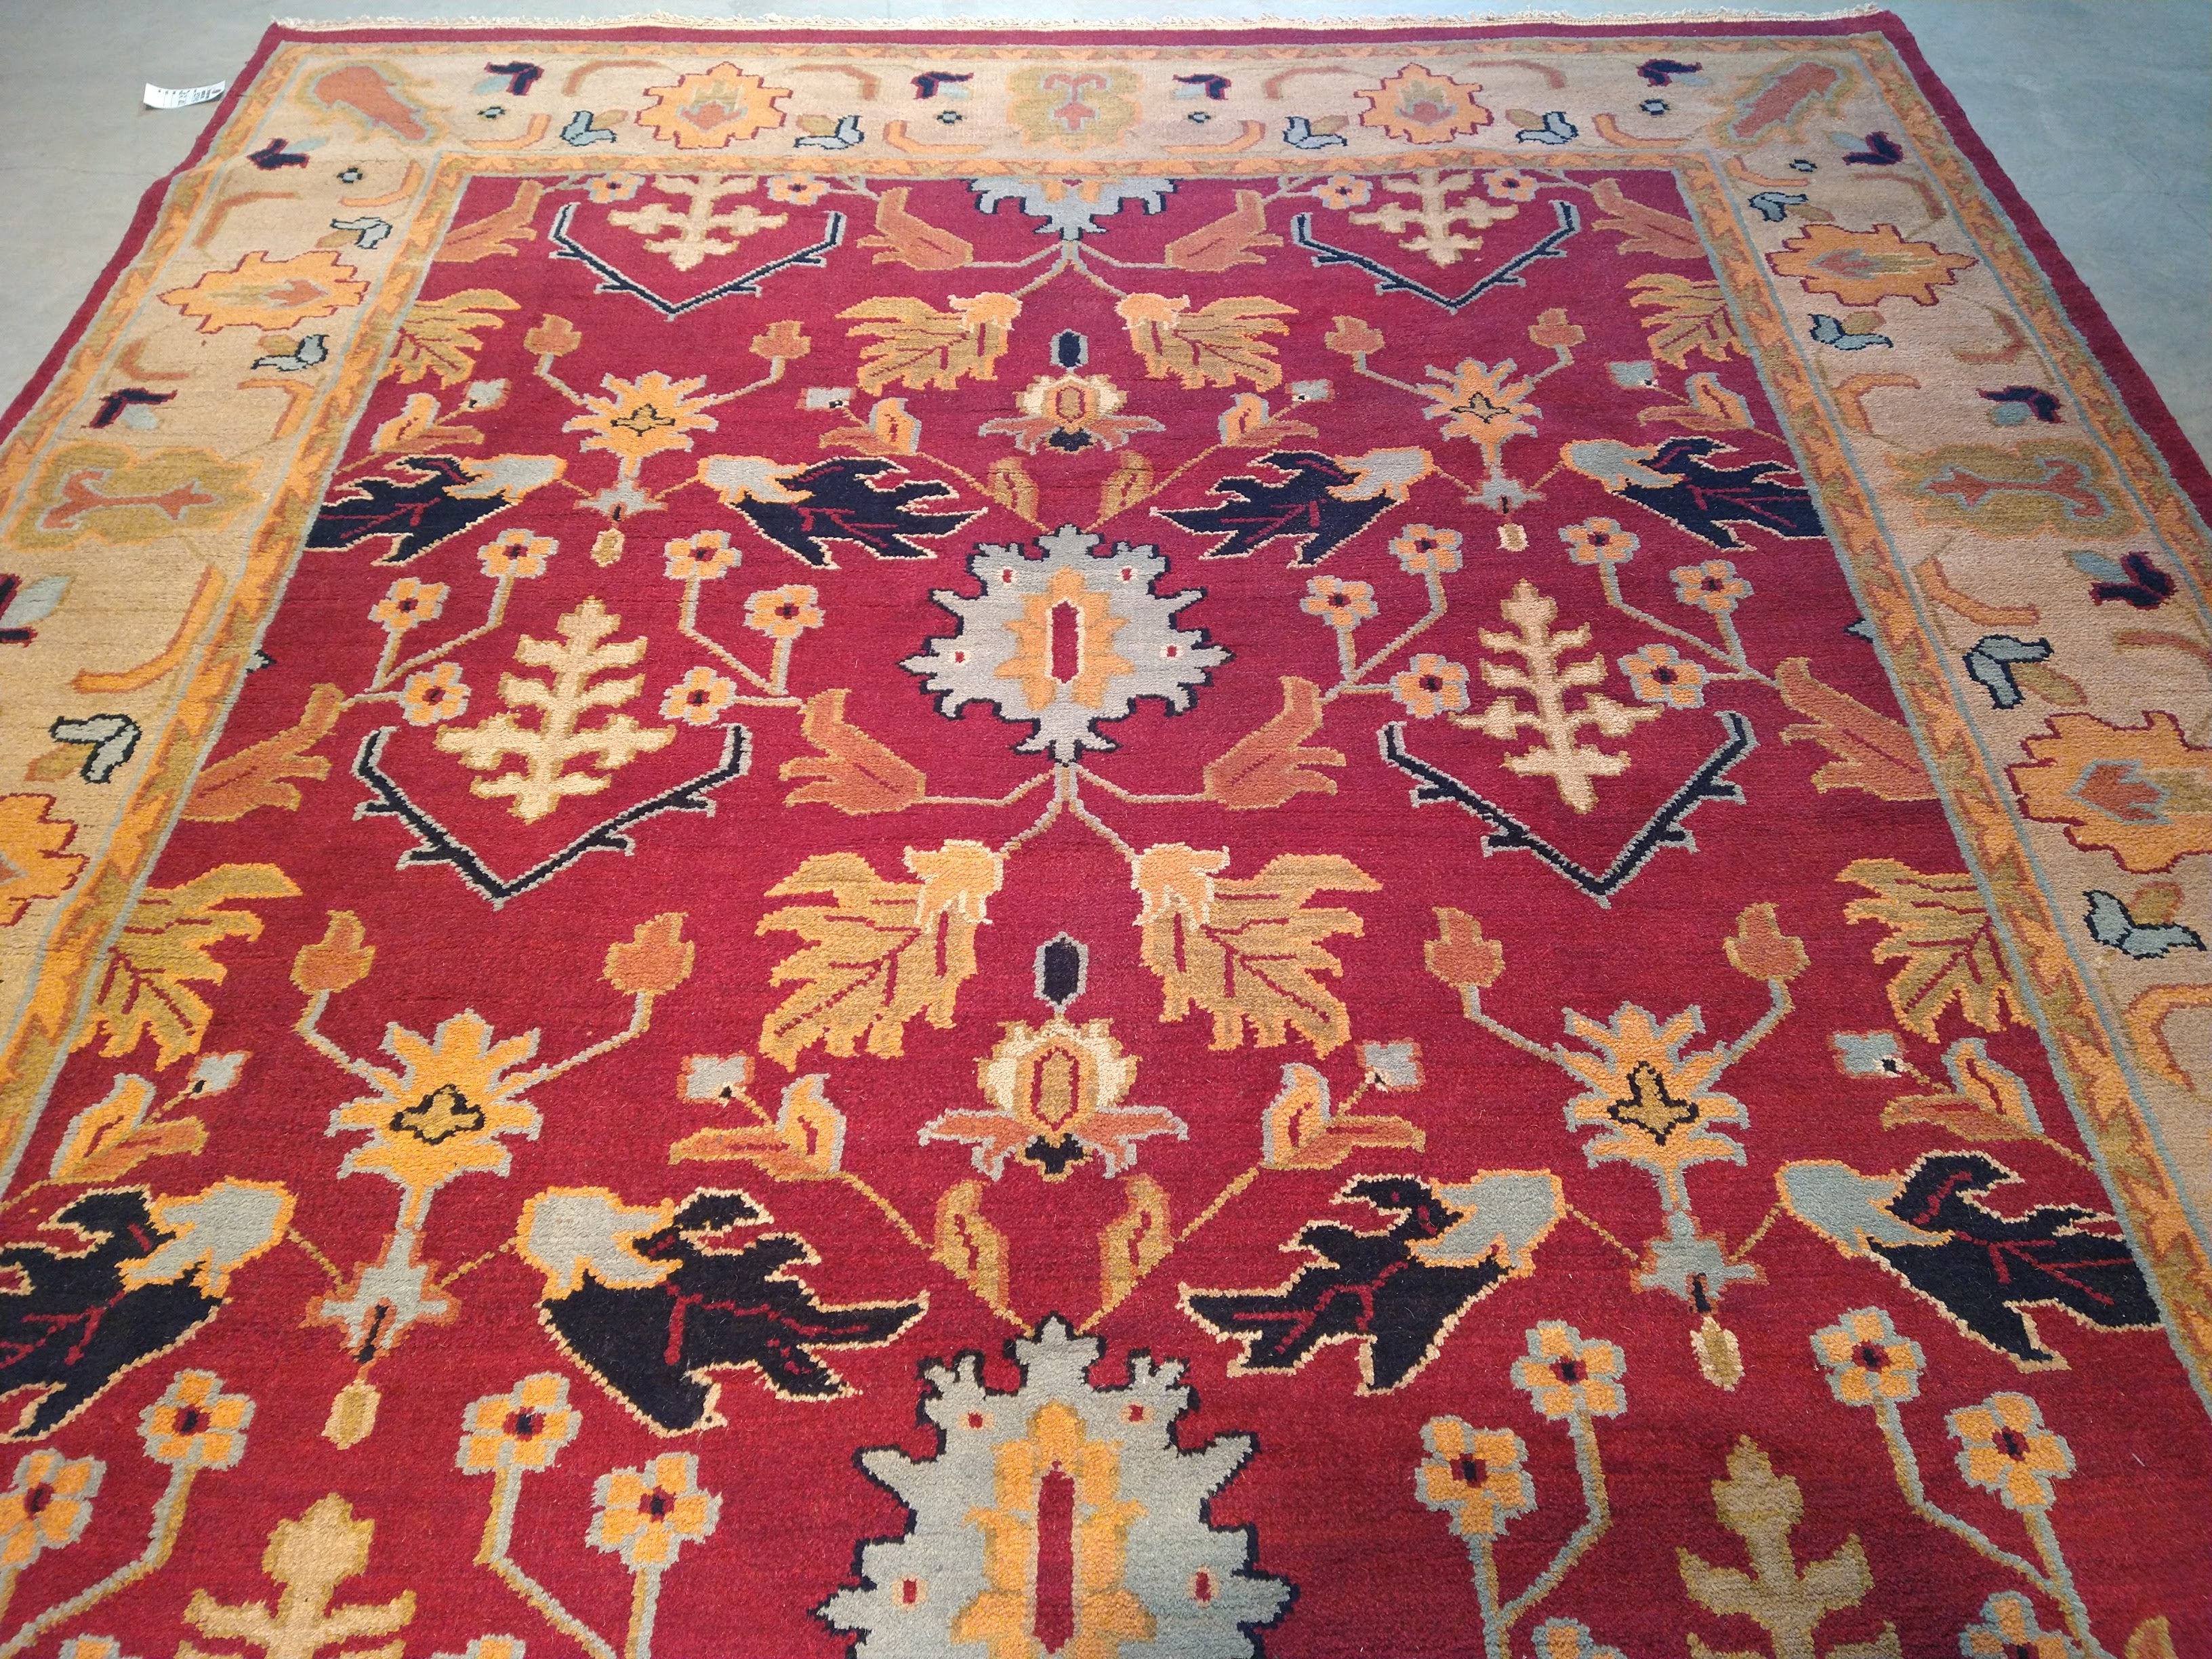 8' x 10' New handmade Rug Antique Red Brown #F-5570